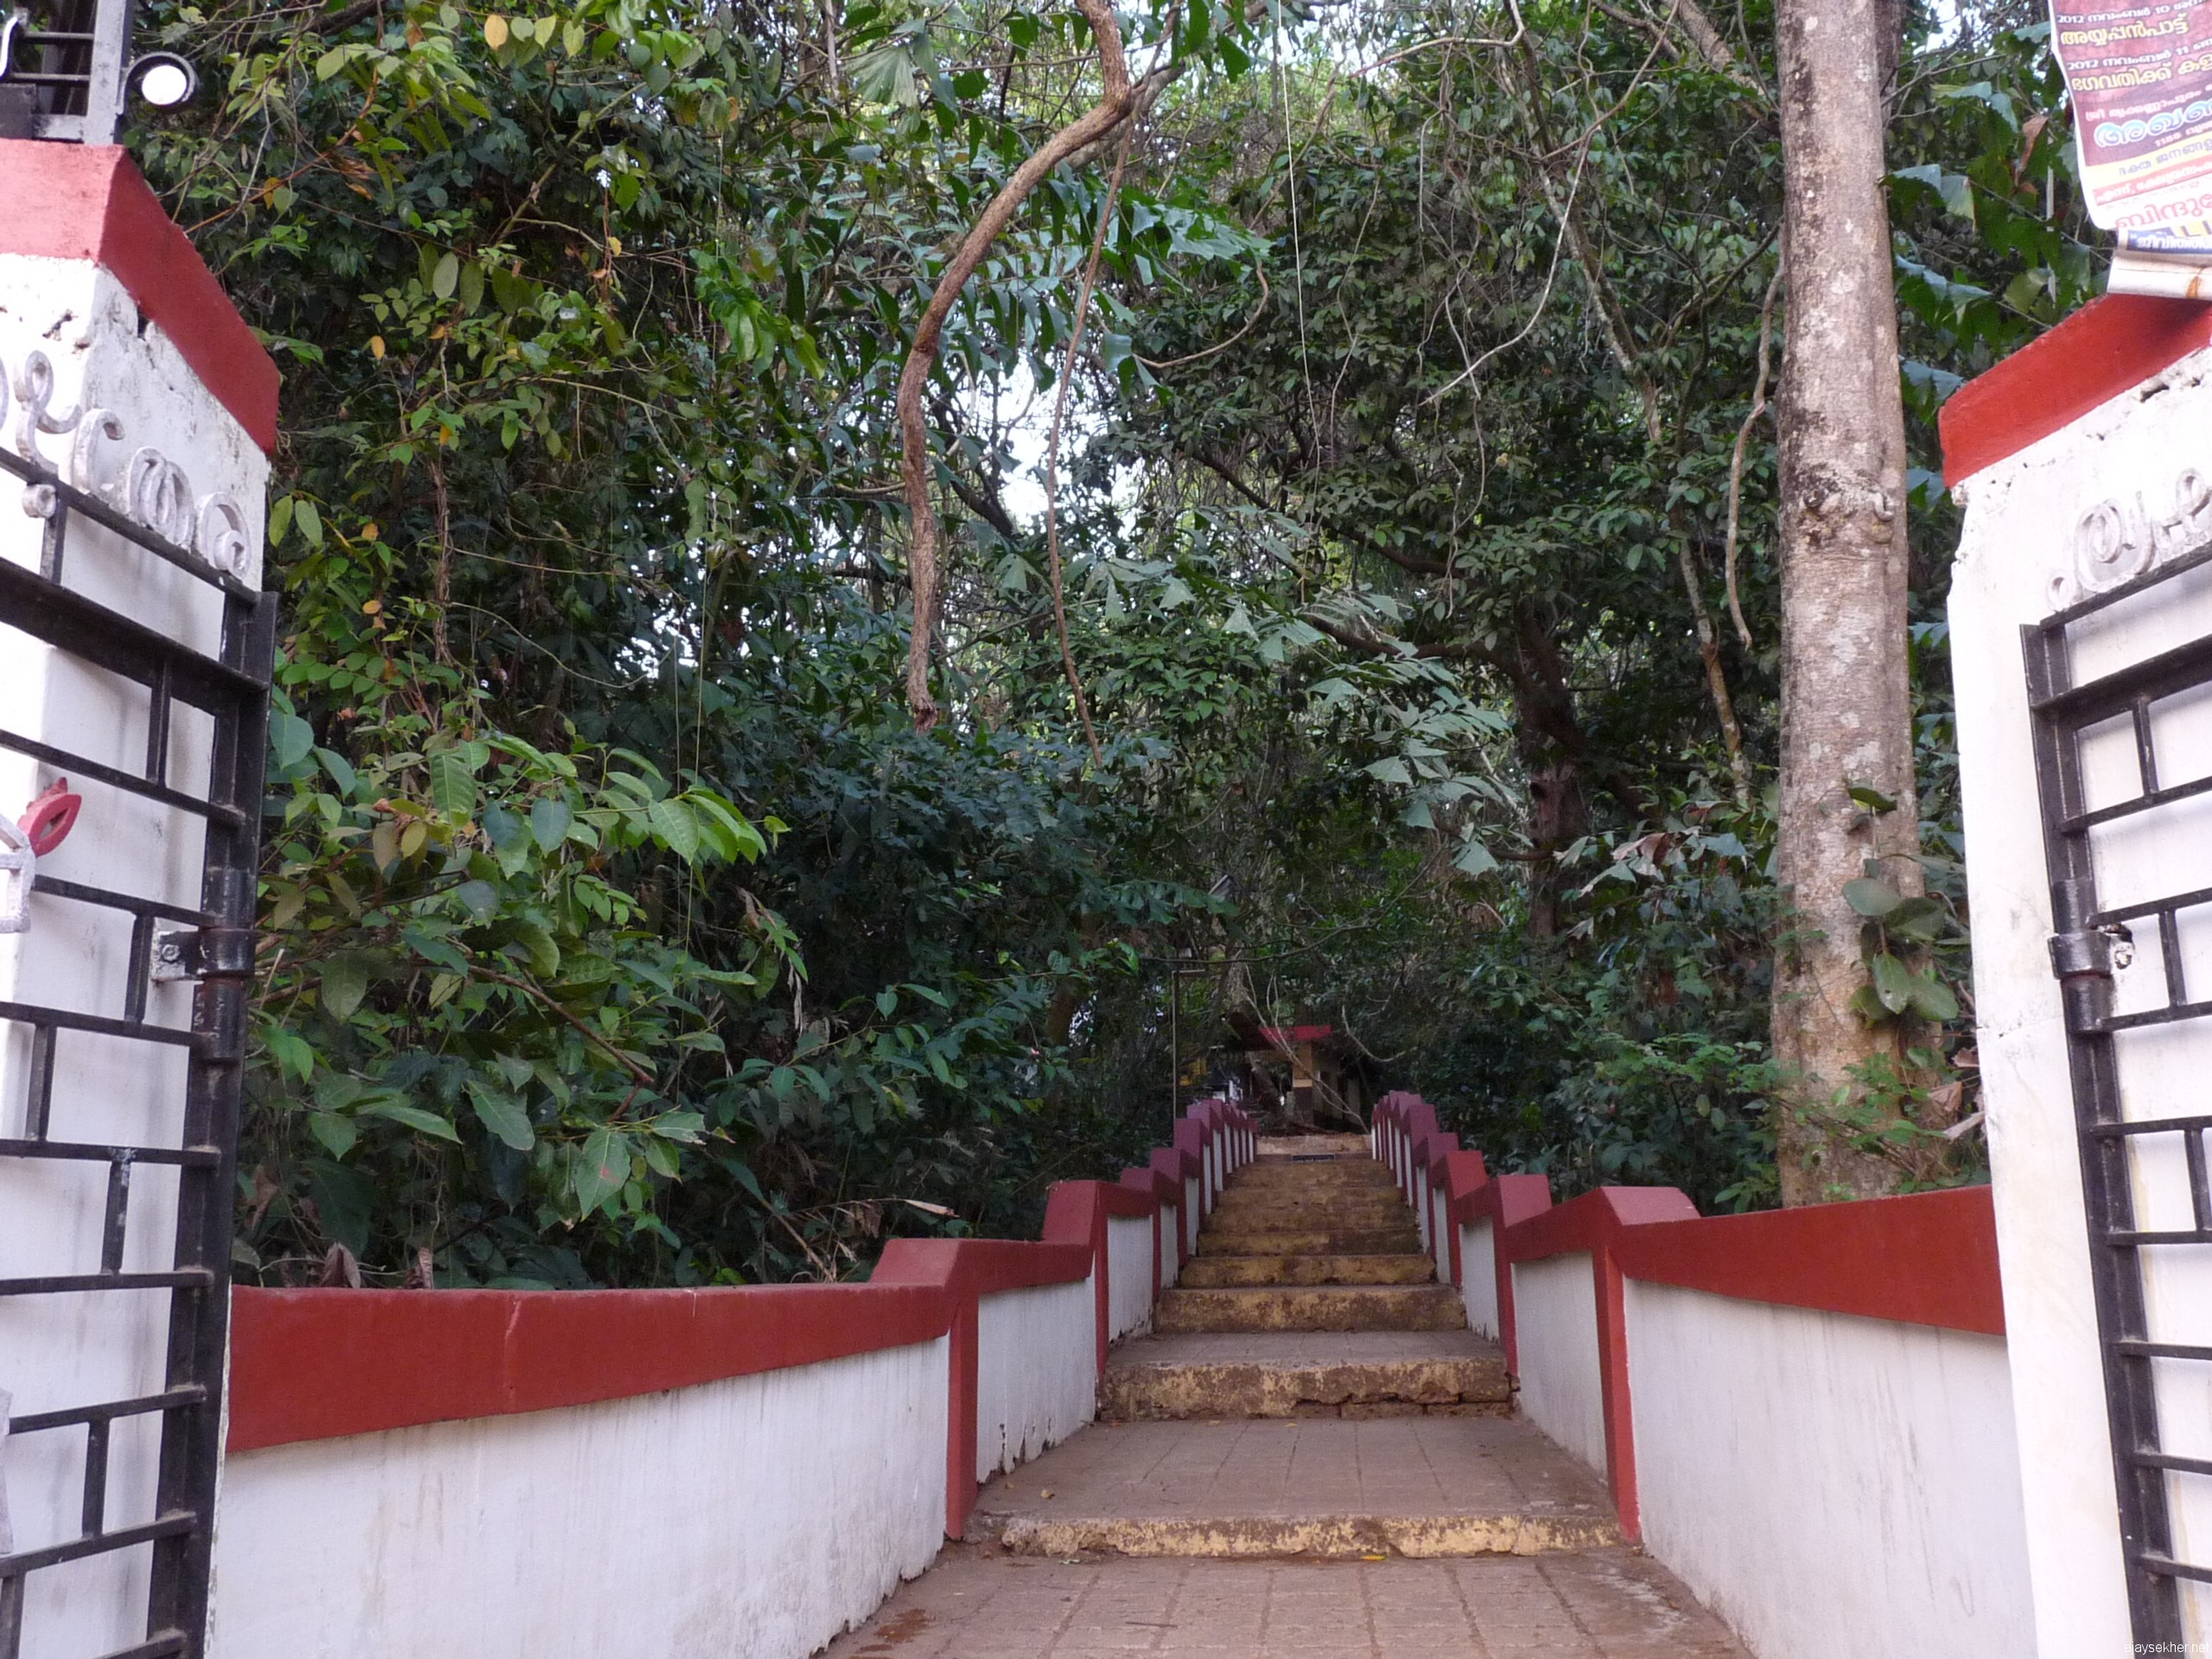 The western gateway of Tozhuvanur Durga temple.  The ancient trees and creepers are still growing in the Kavu or ancient sacred grove in the memory of a nun.